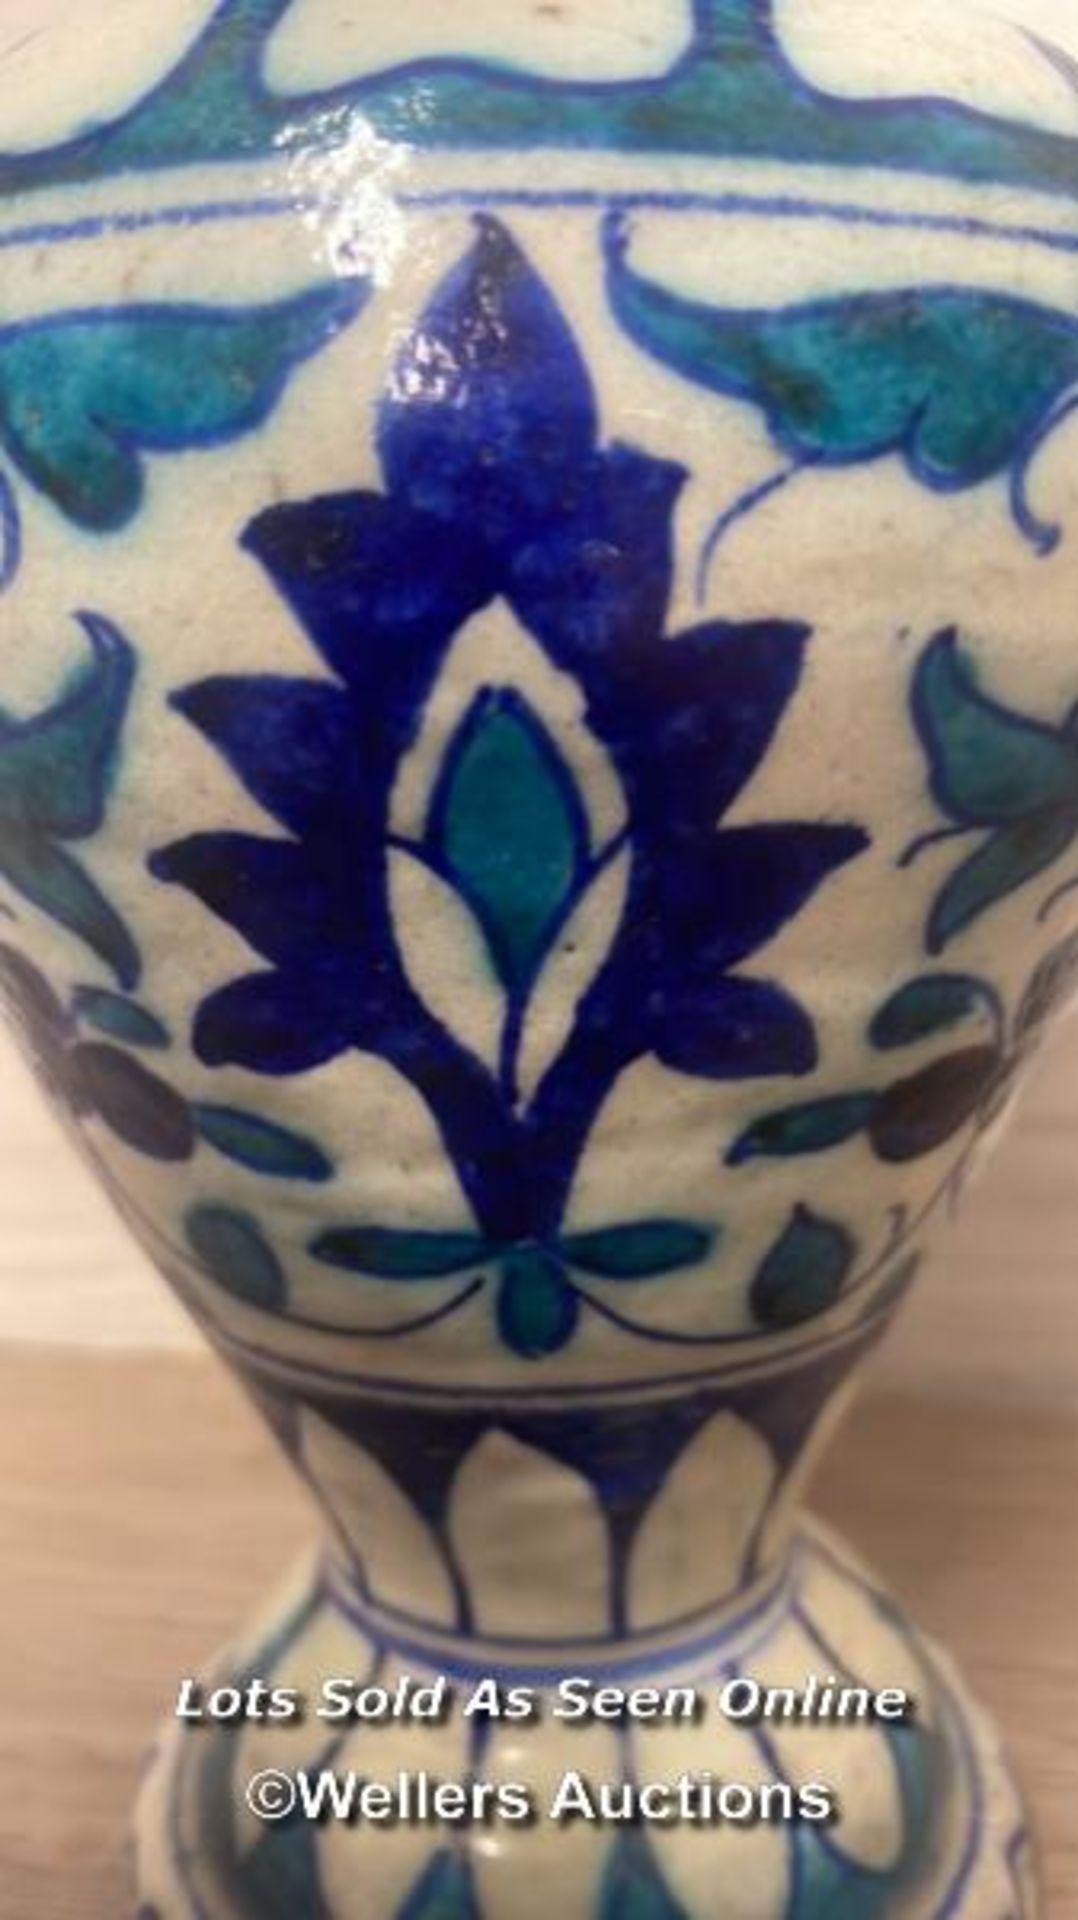 TWO SIMILAR MULTAN POTTERY VASES FROM PAKISTAN, HAND PAINTED BLUE & TURQUOISE FOLIAGE AND FLOWER - Image 3 of 15